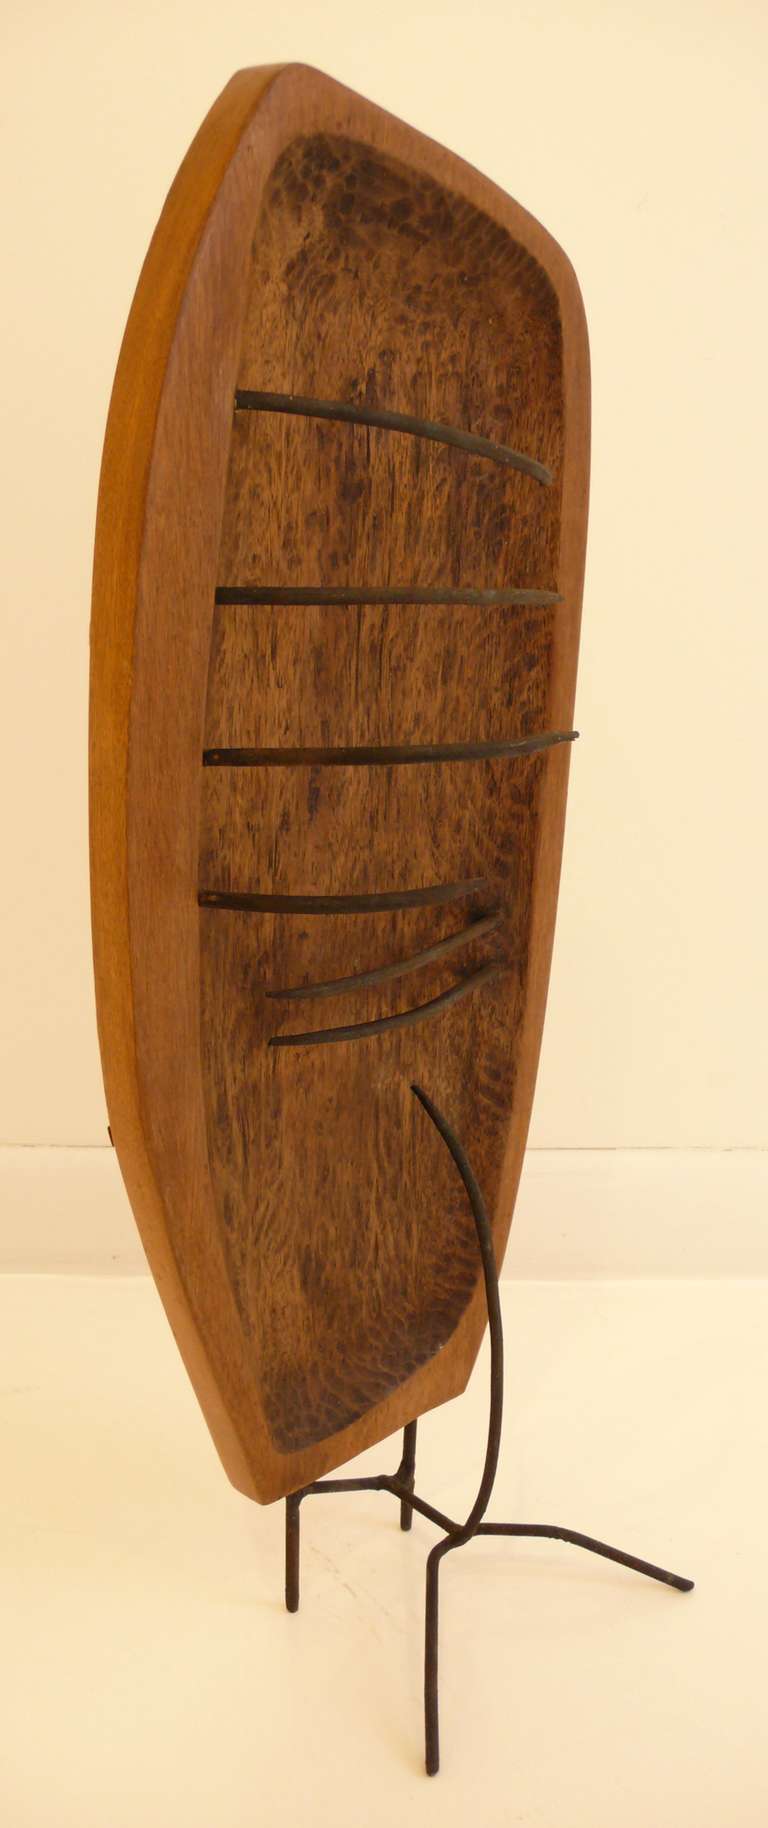 Eccentric and interesting abstract sculpture of carved and hewn wood with curved iron spikes on one side and strips of wood on the other; atop a nicely integrated wrought iron base.  By Washington, DC,  artist Jennie Lea Knight (1934-2007).  Knight